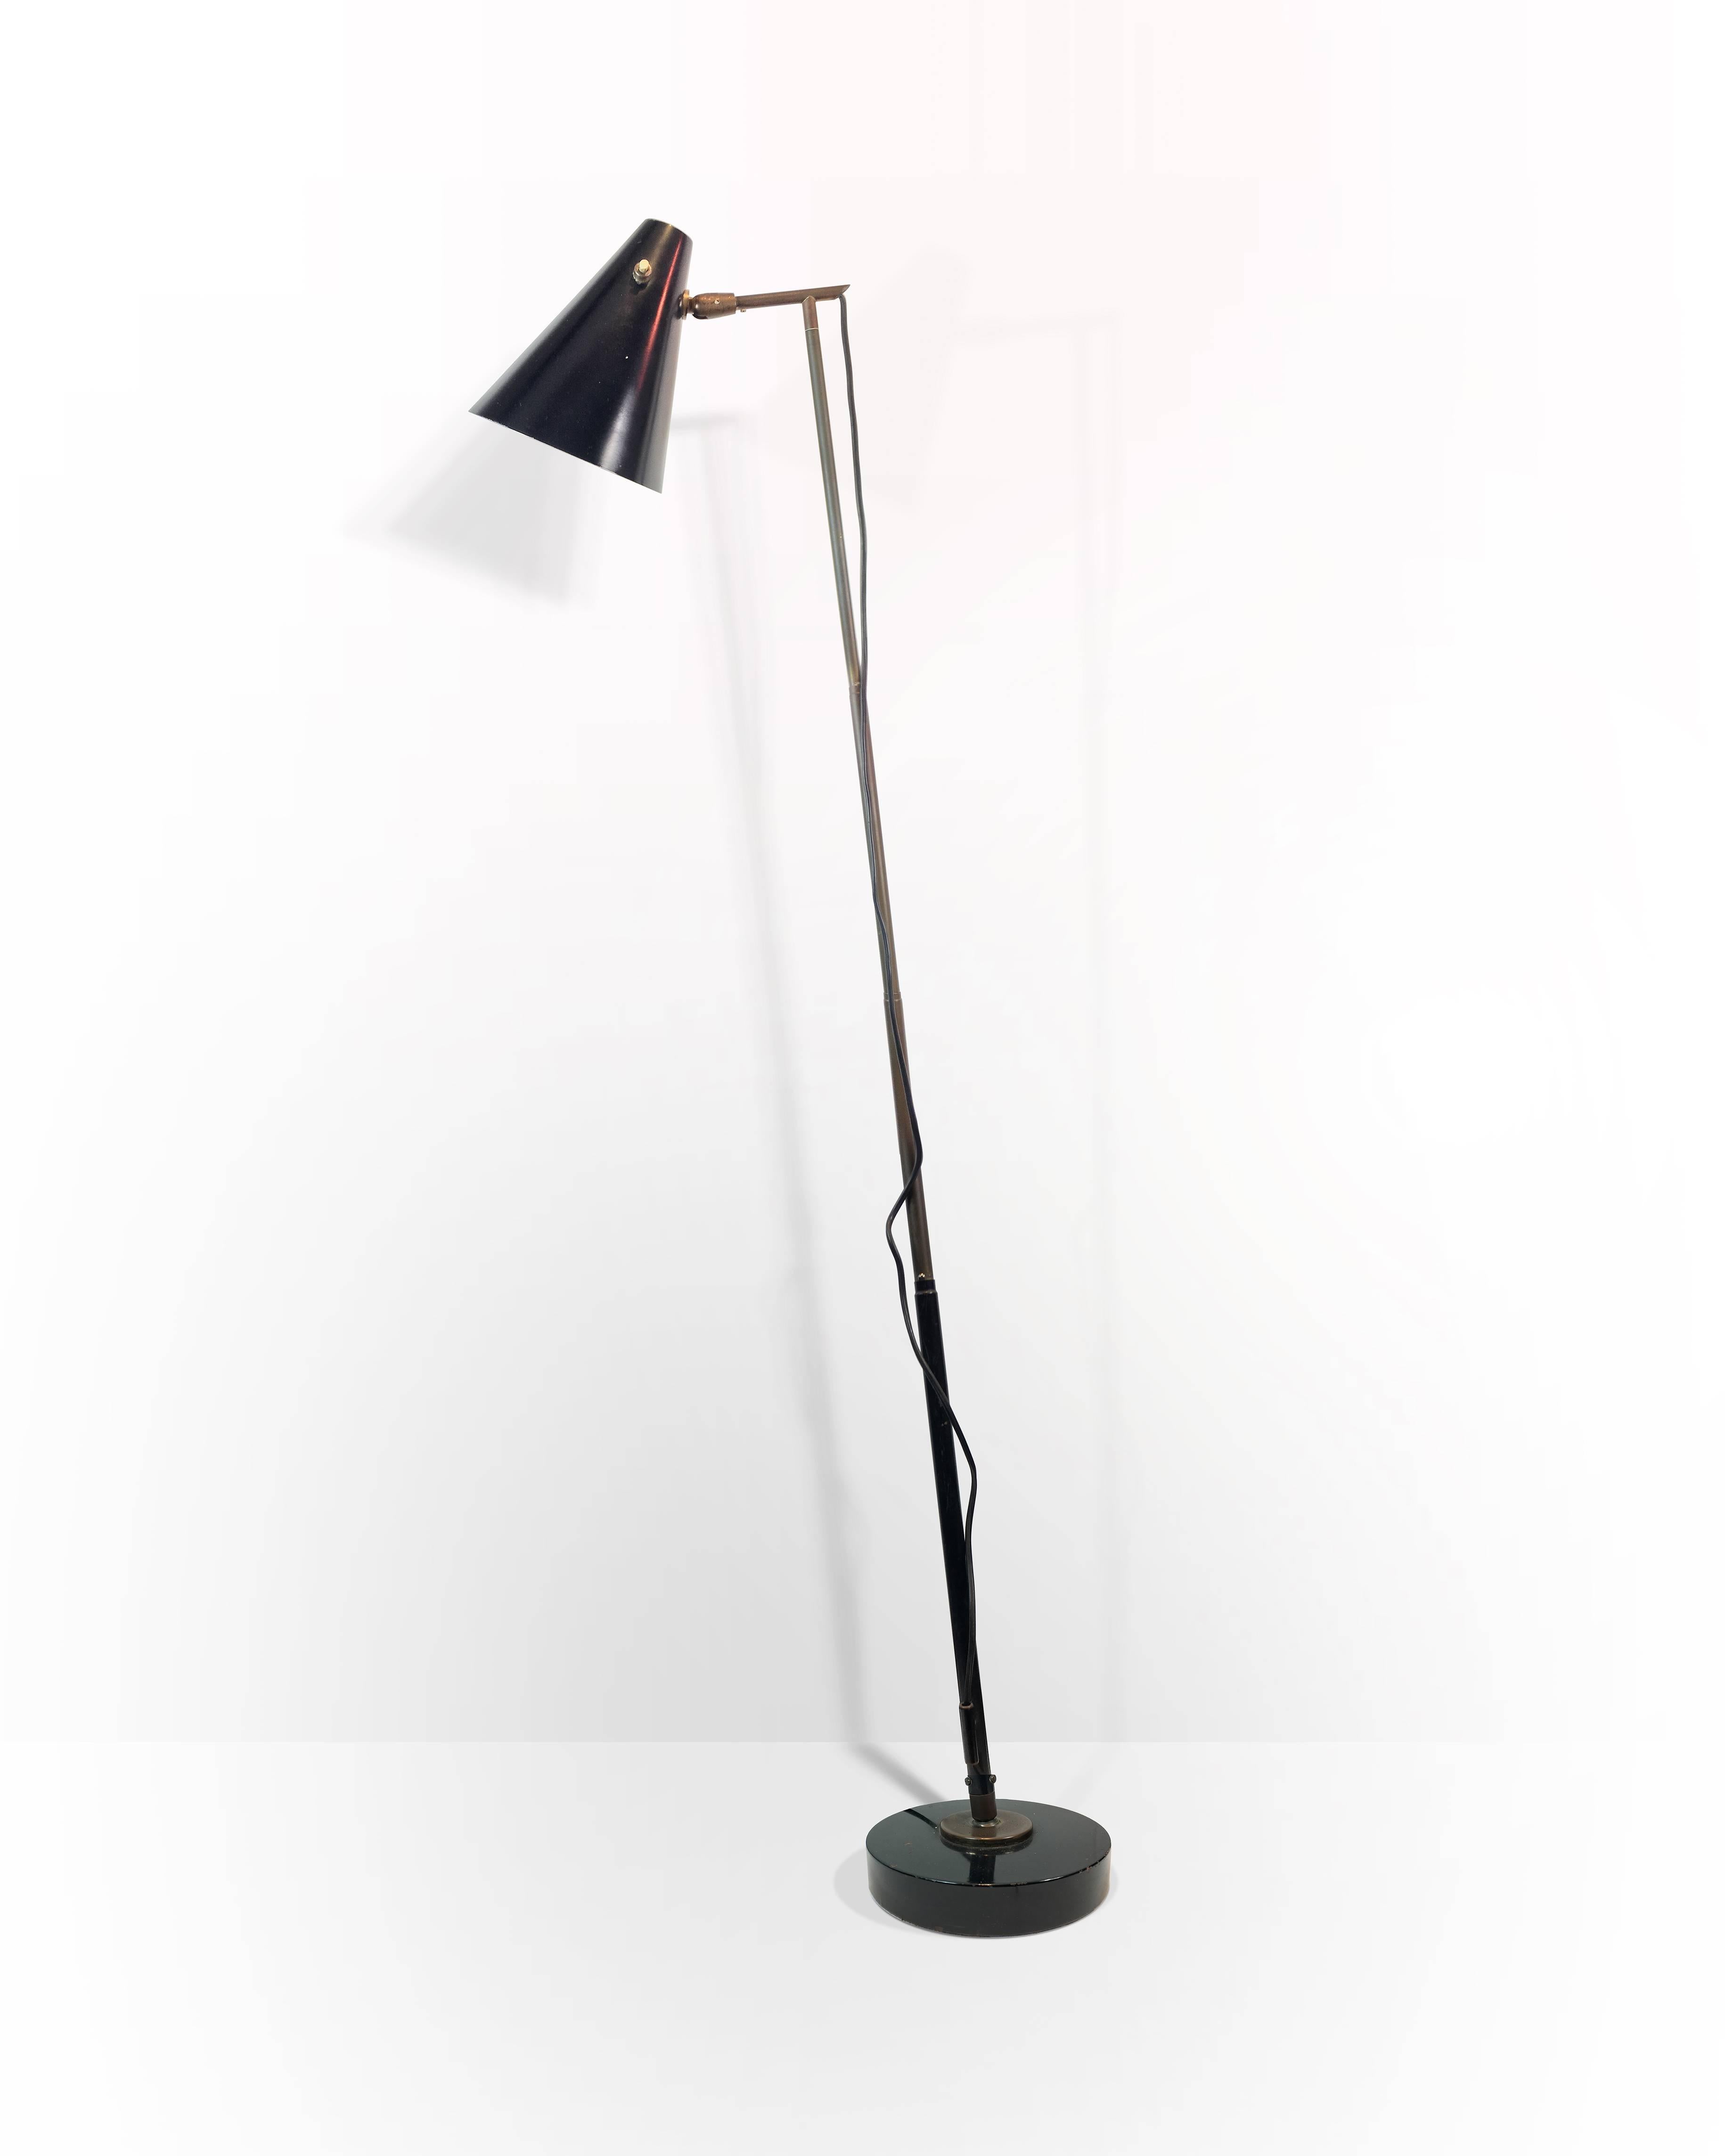 Black metal lamp with adjustable height and angle, made in metal and black enamel. Was designed for Oluce by Giuseppe Ostuni in 1950s.